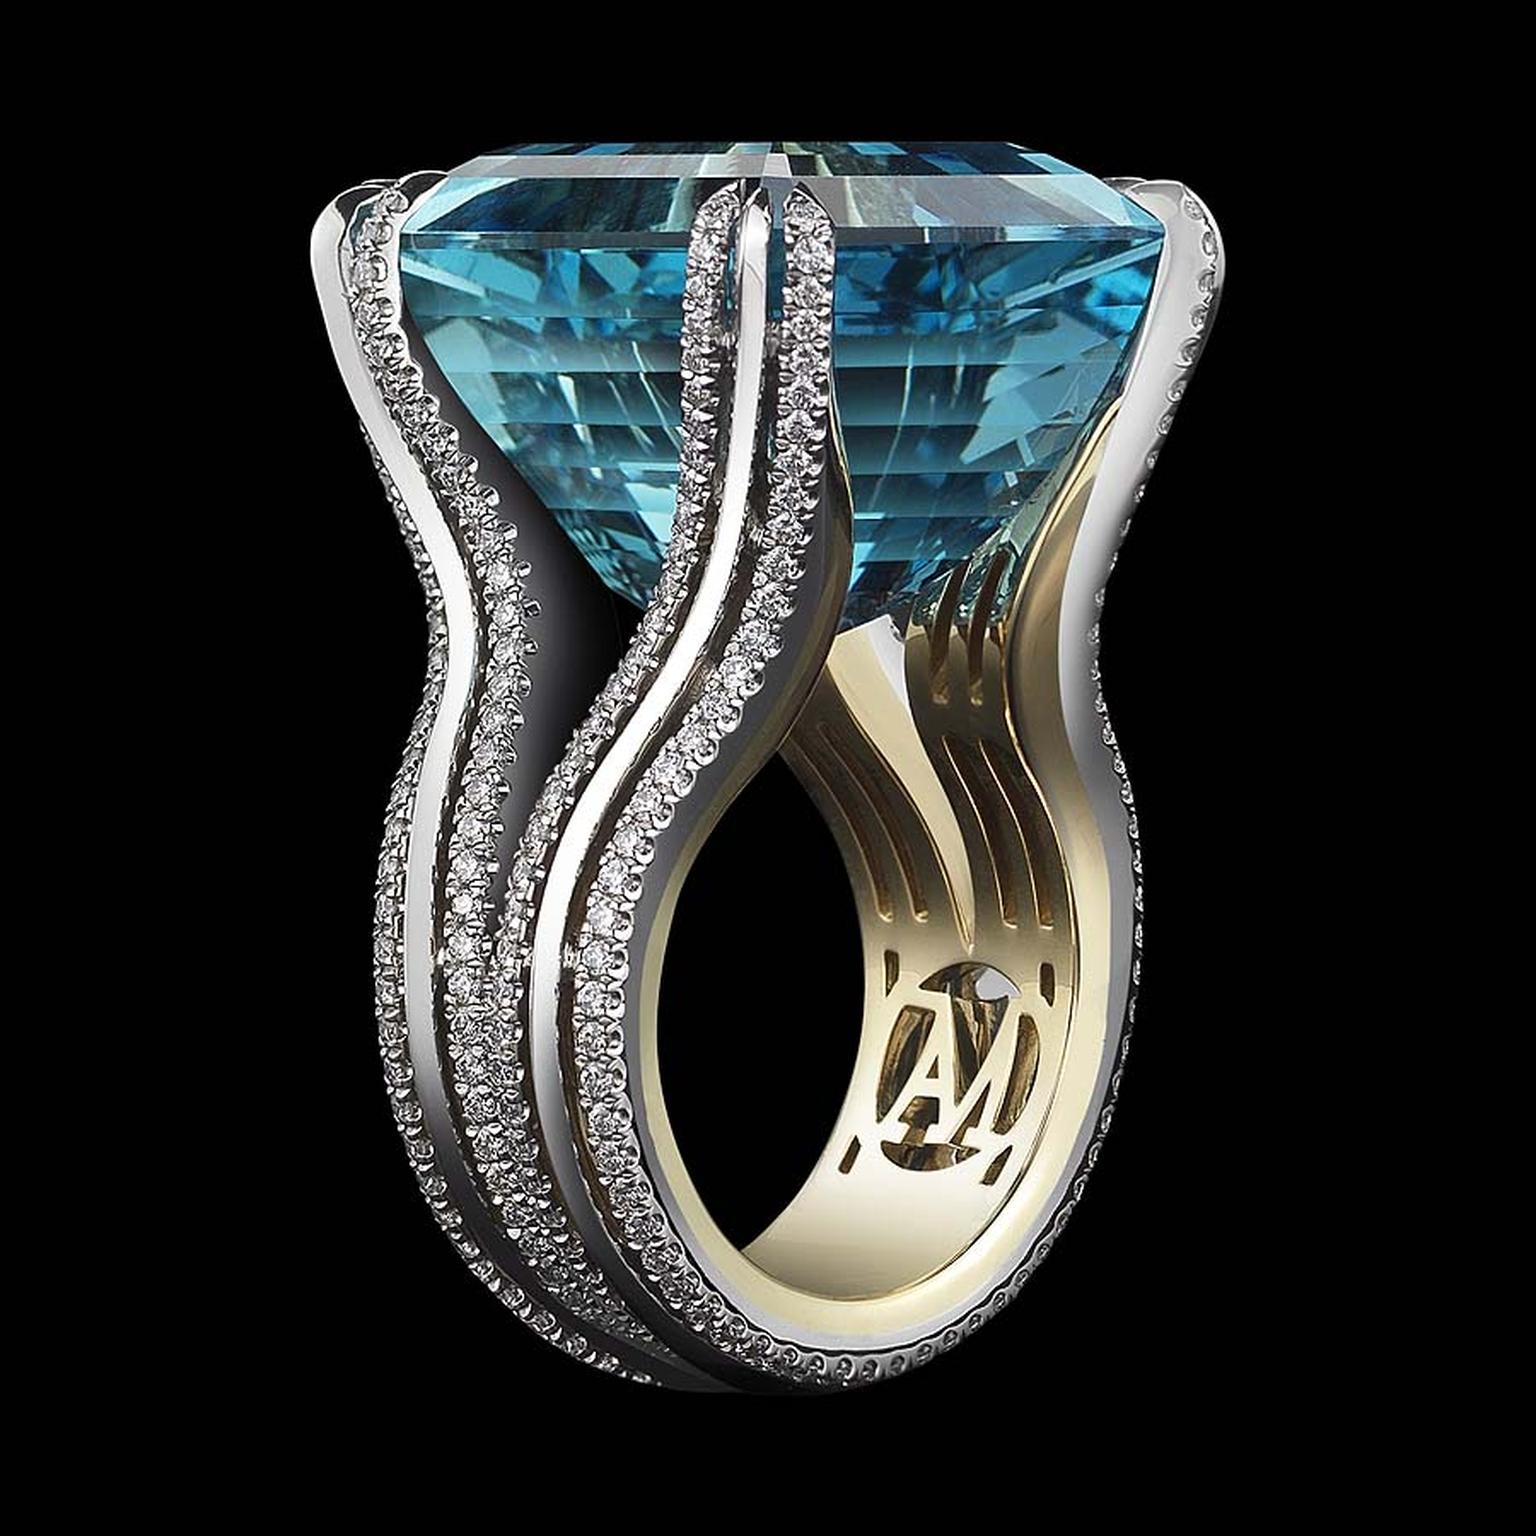 The Ode to Enchanted Light aquamarine ring from Alexandra Mor is set with an extraordinary 27.24ct Asscher-cut intense bright blue-green aquamarine.